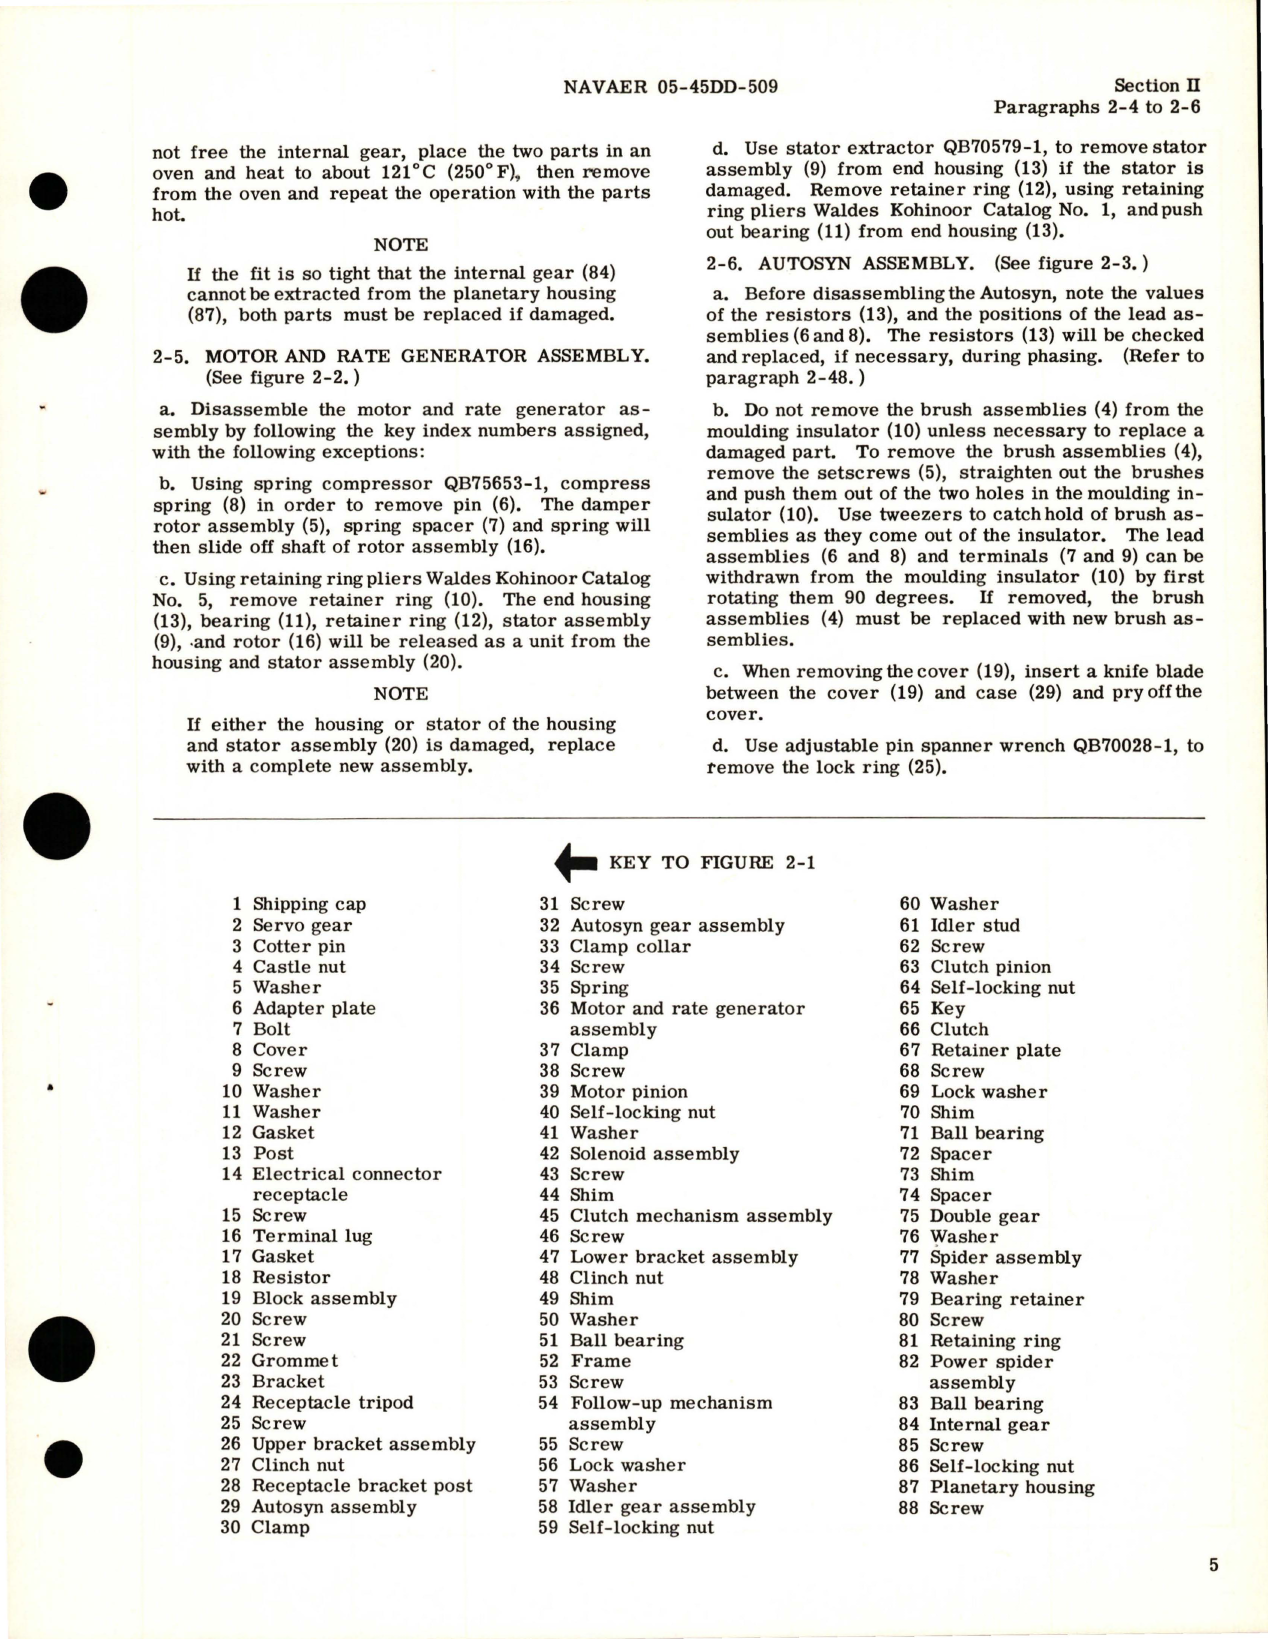 Sample page 9 from AirCorps Library document: Overhaul Instructions for Servo - Part 15613-1-B 